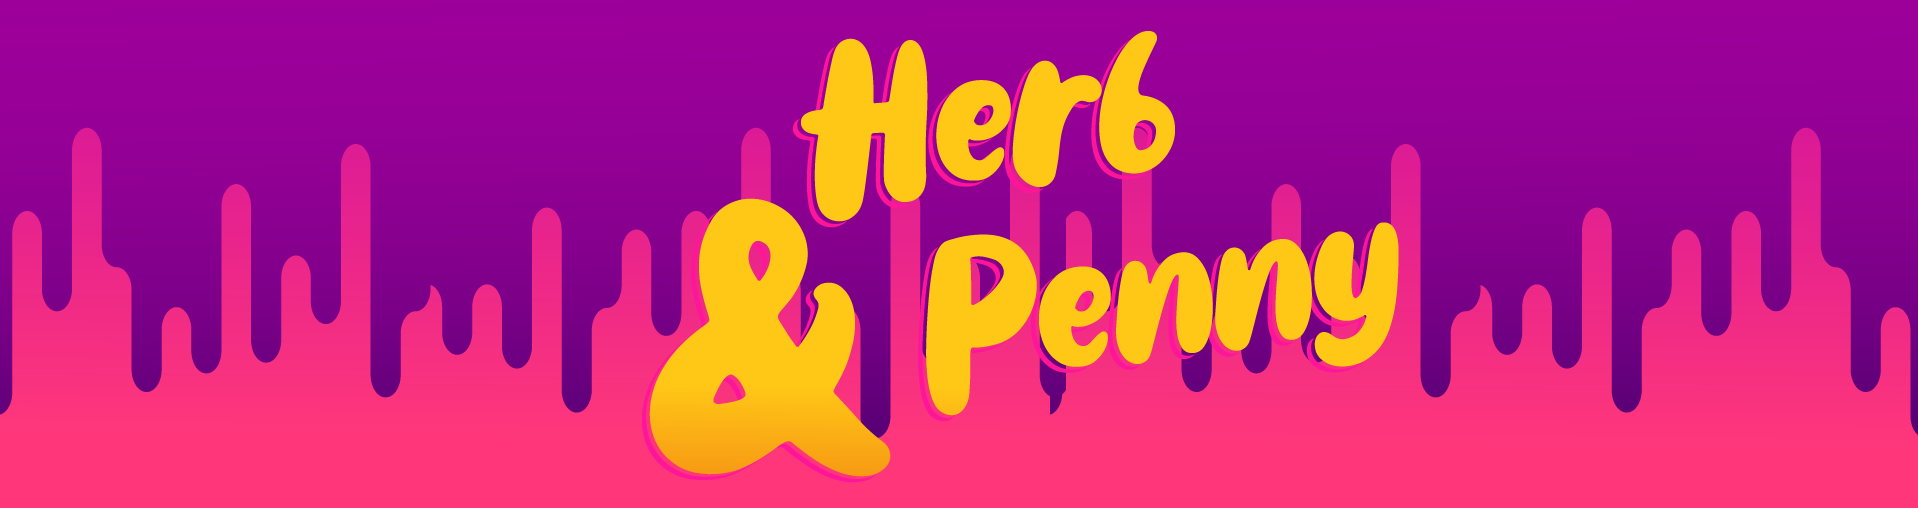 Herb & Penny